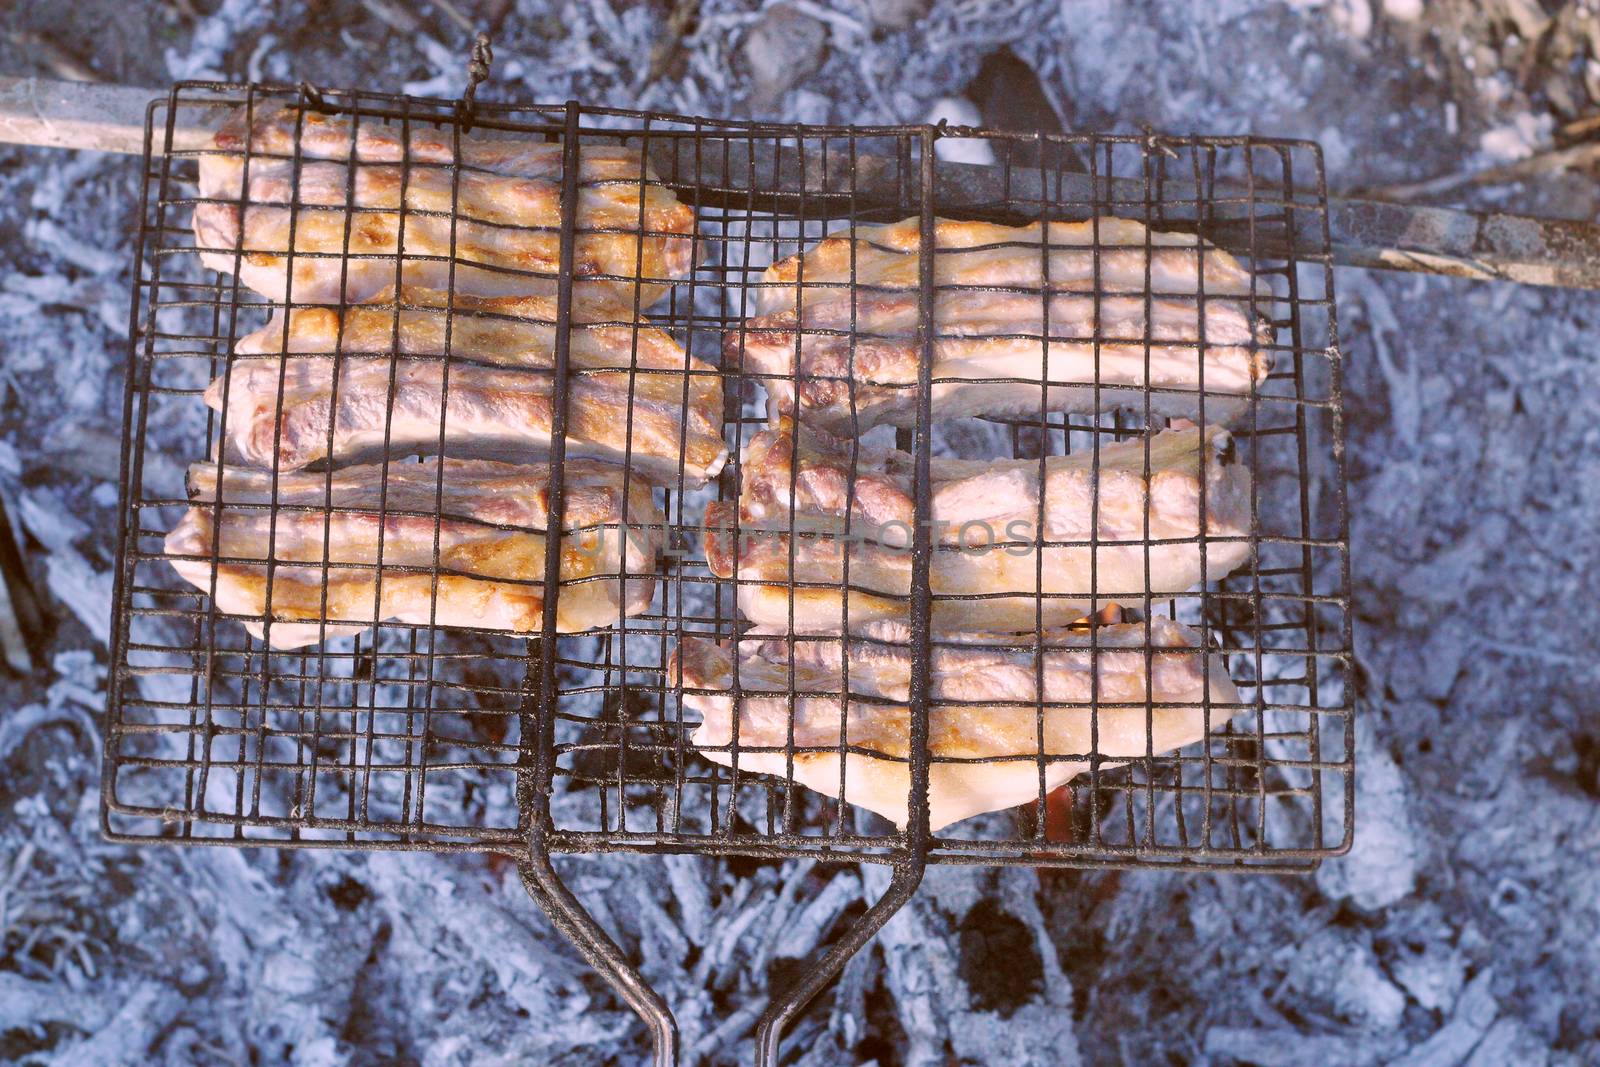 Barbeque from pork prepared outdoors on a hot summer day in a camp